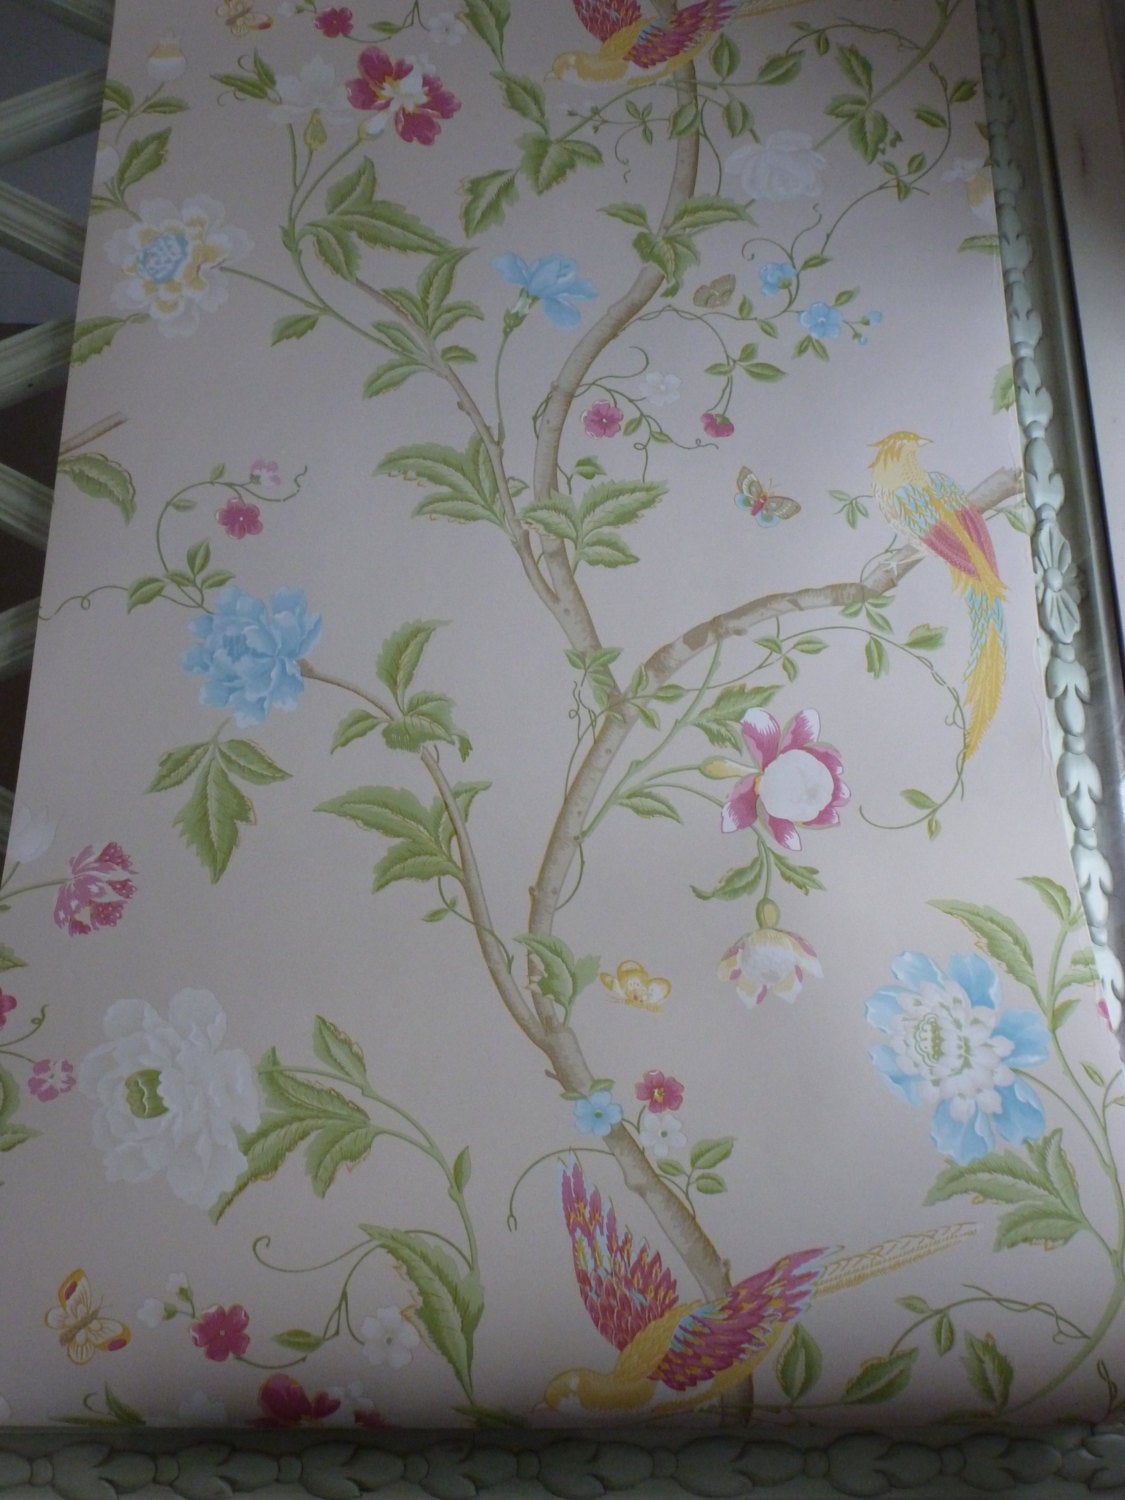 laura ashley sommerpalast tapete,rosa,textil ,muster,bettwäsche,pflanze